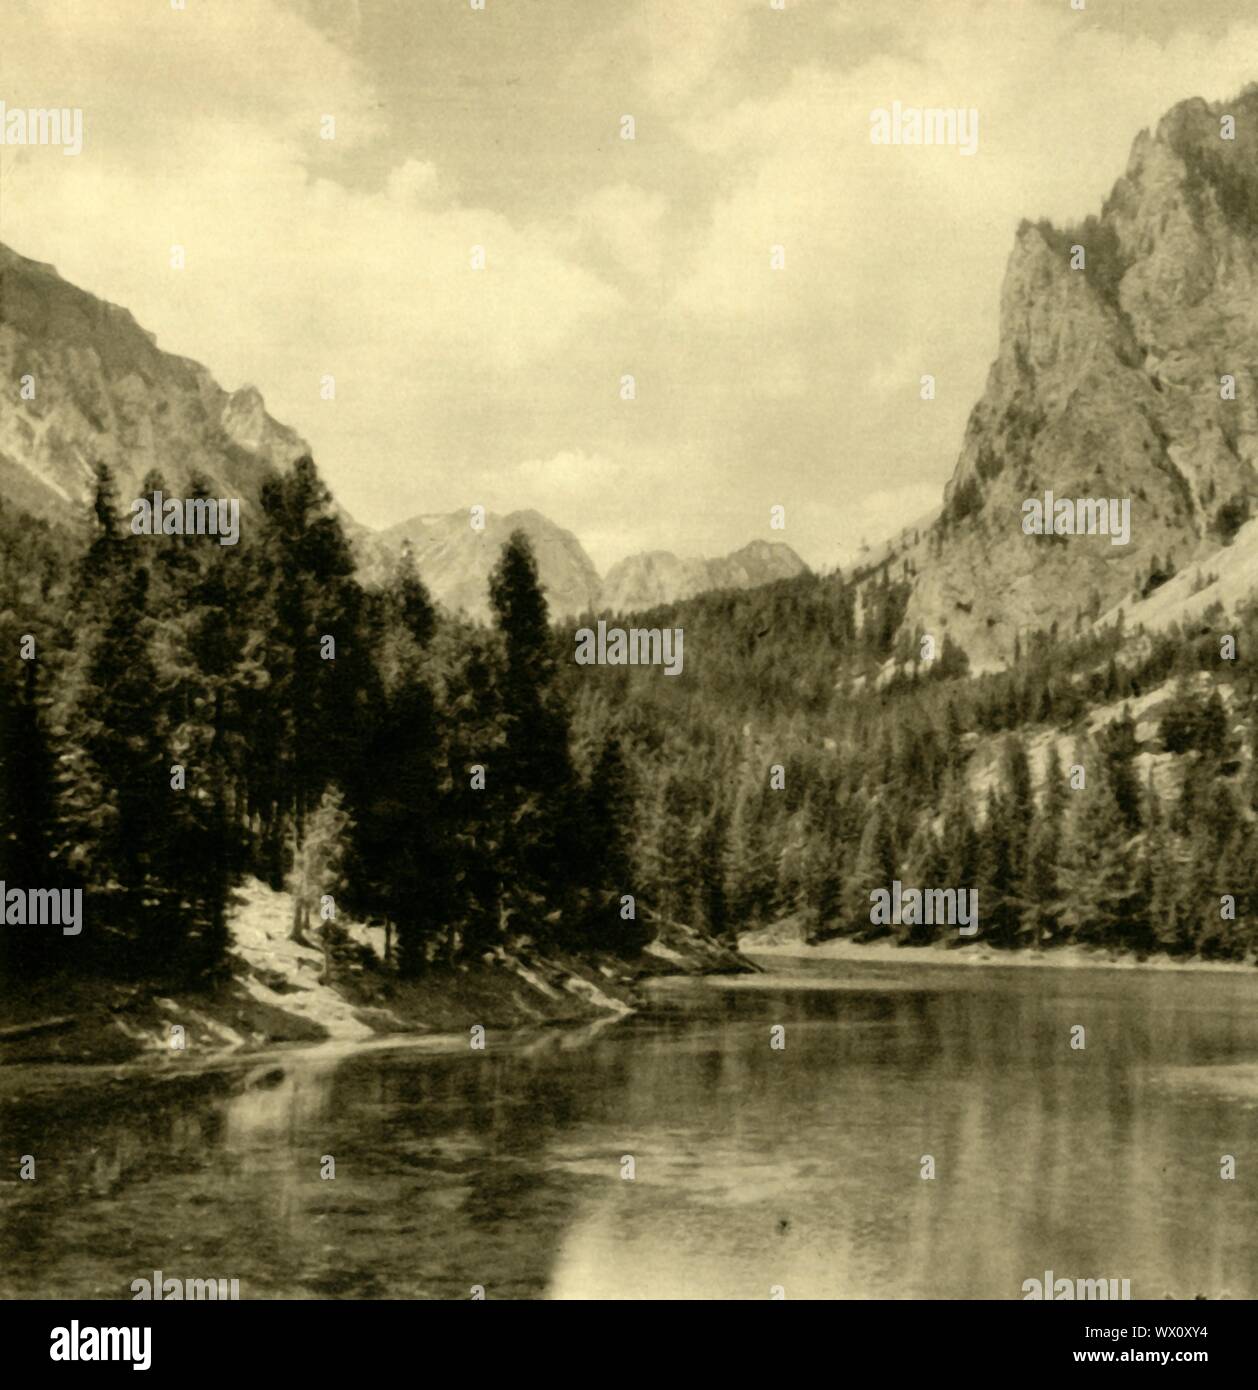 The Gr&#xfc;ner See, Styria, Austria, c1935. Gr&#xfc;ner See (Green Lake) surrounded by the Hochschwab Mountains. From &quot;&#xd6;sterreich - Land Und Volk&quot;, (Austria, Land and People). [R. Lechner (Wilhelm M&#xfc;ller), Vienna, c1935] Stock Photo